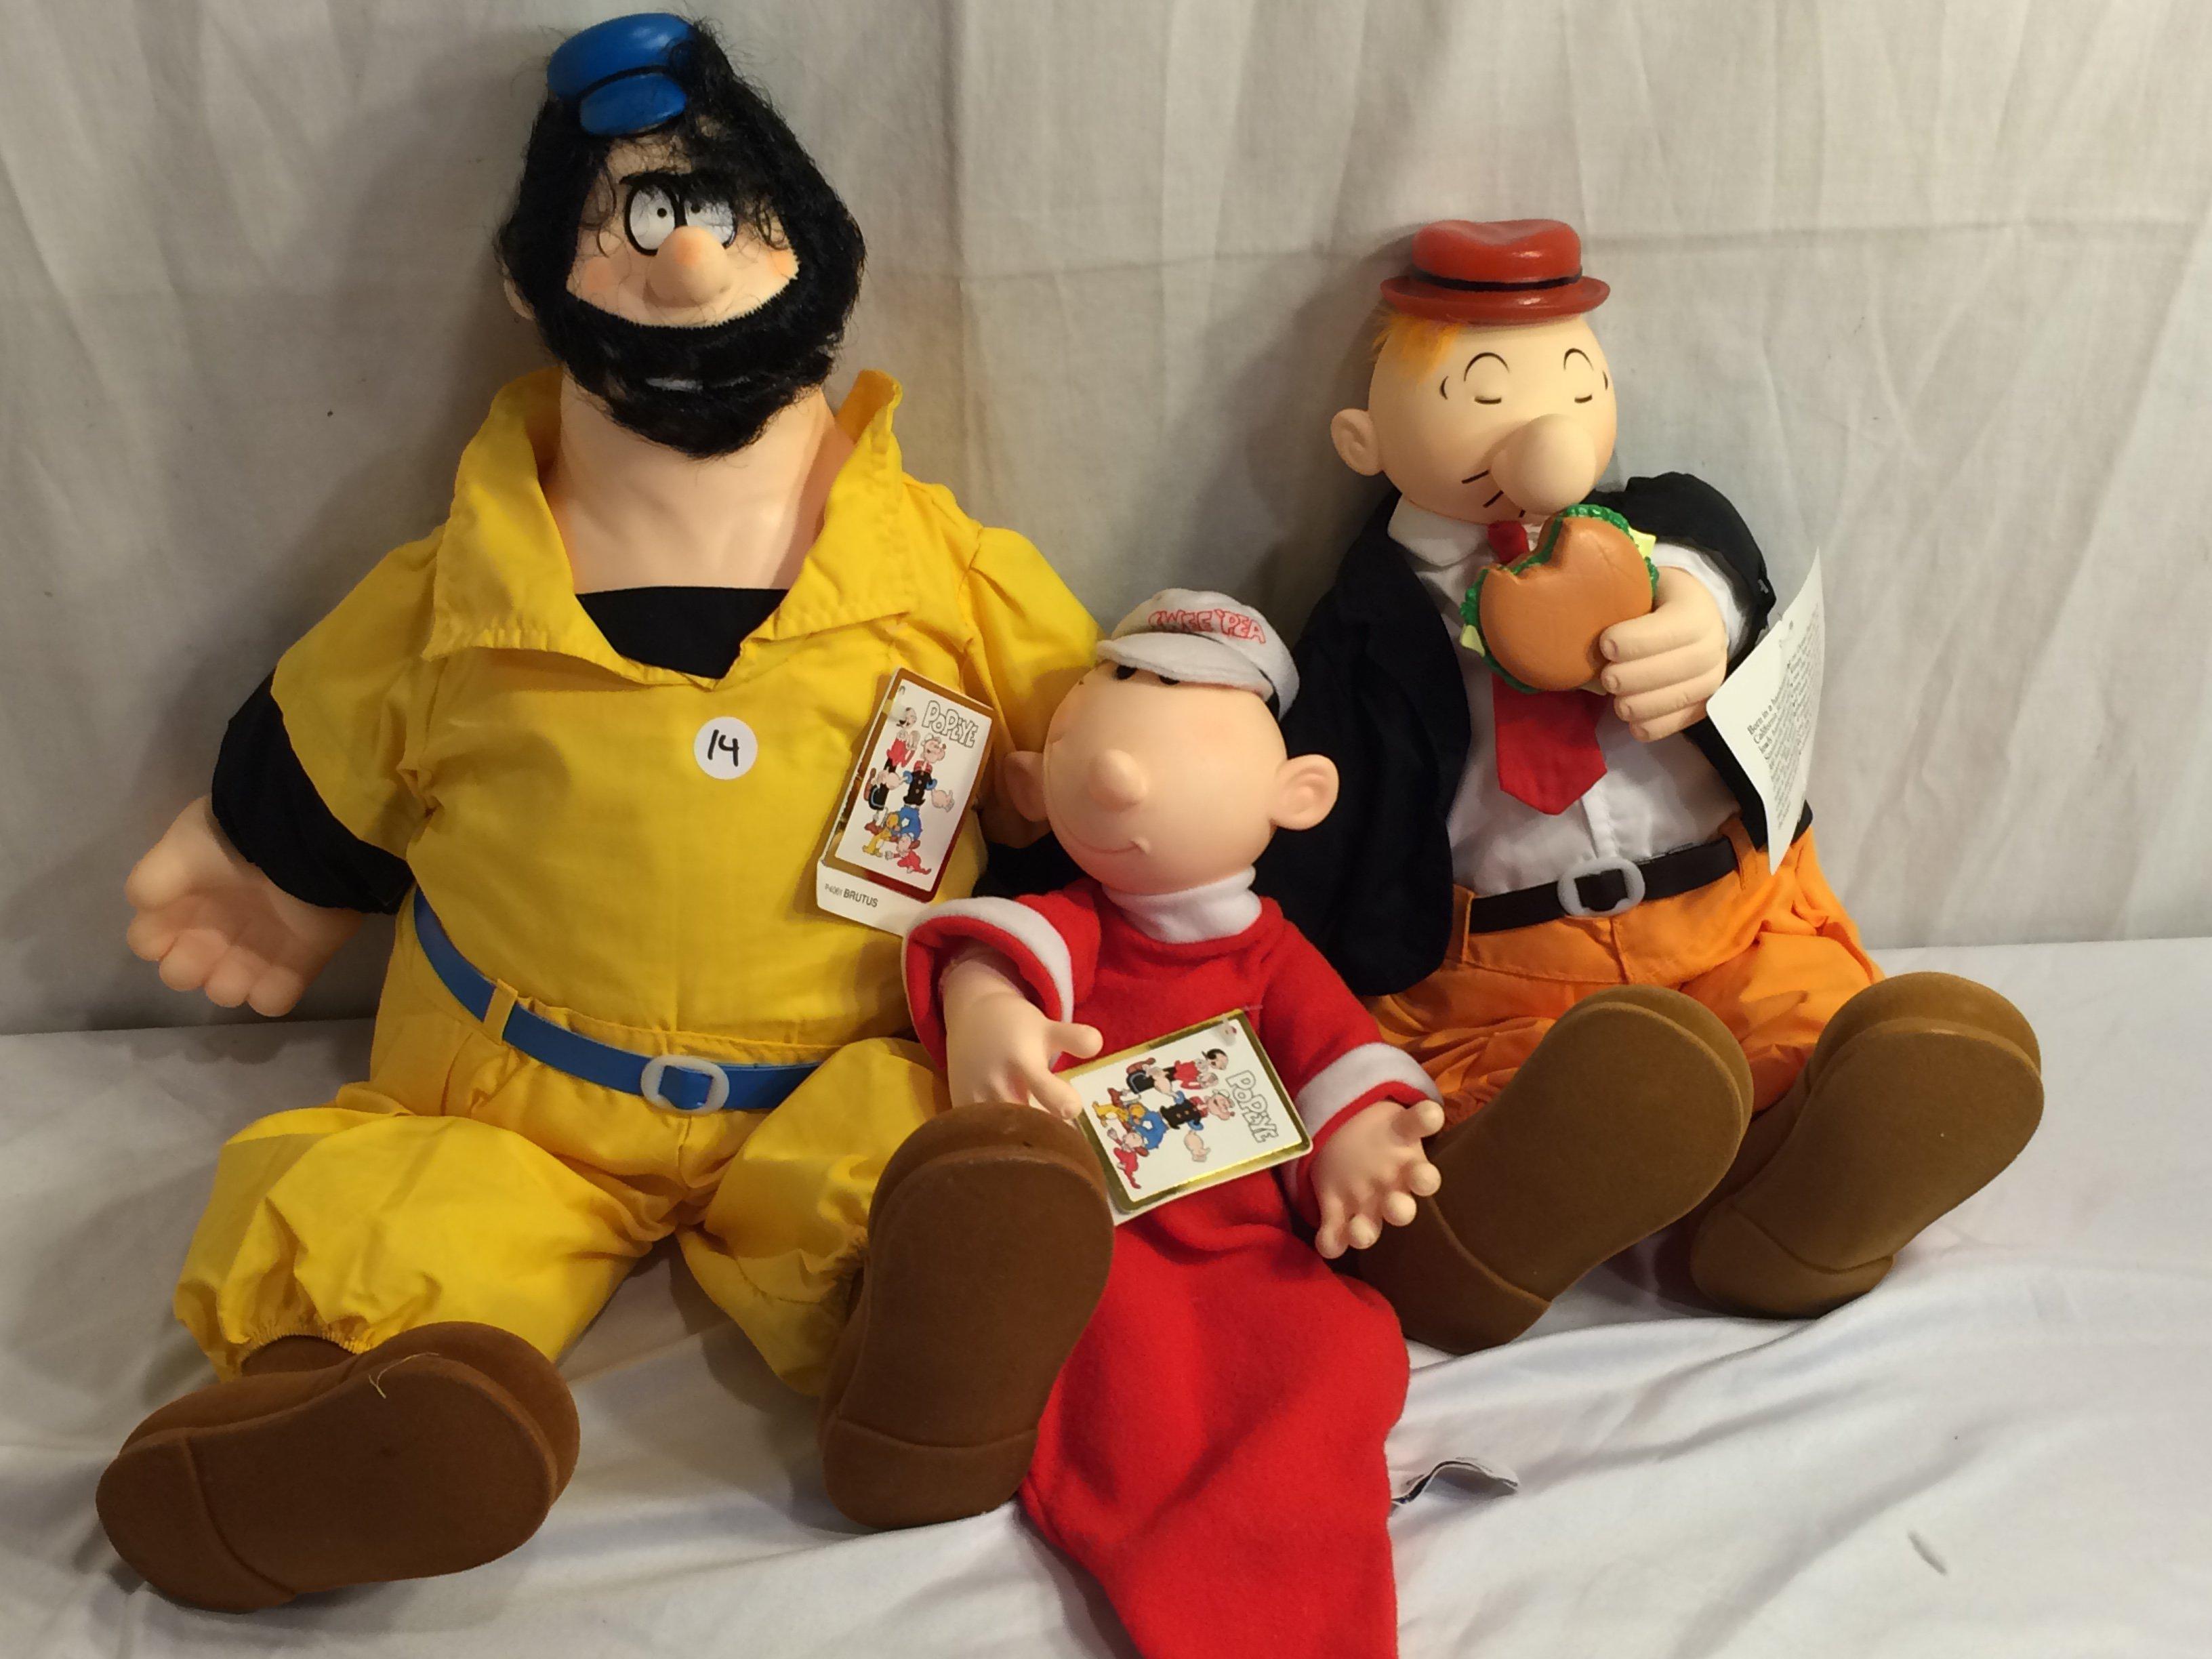 Lot of 3 Pieces Collector Popeye Vinyl Soft Tpys Size:15-21"Tall - See Pictures